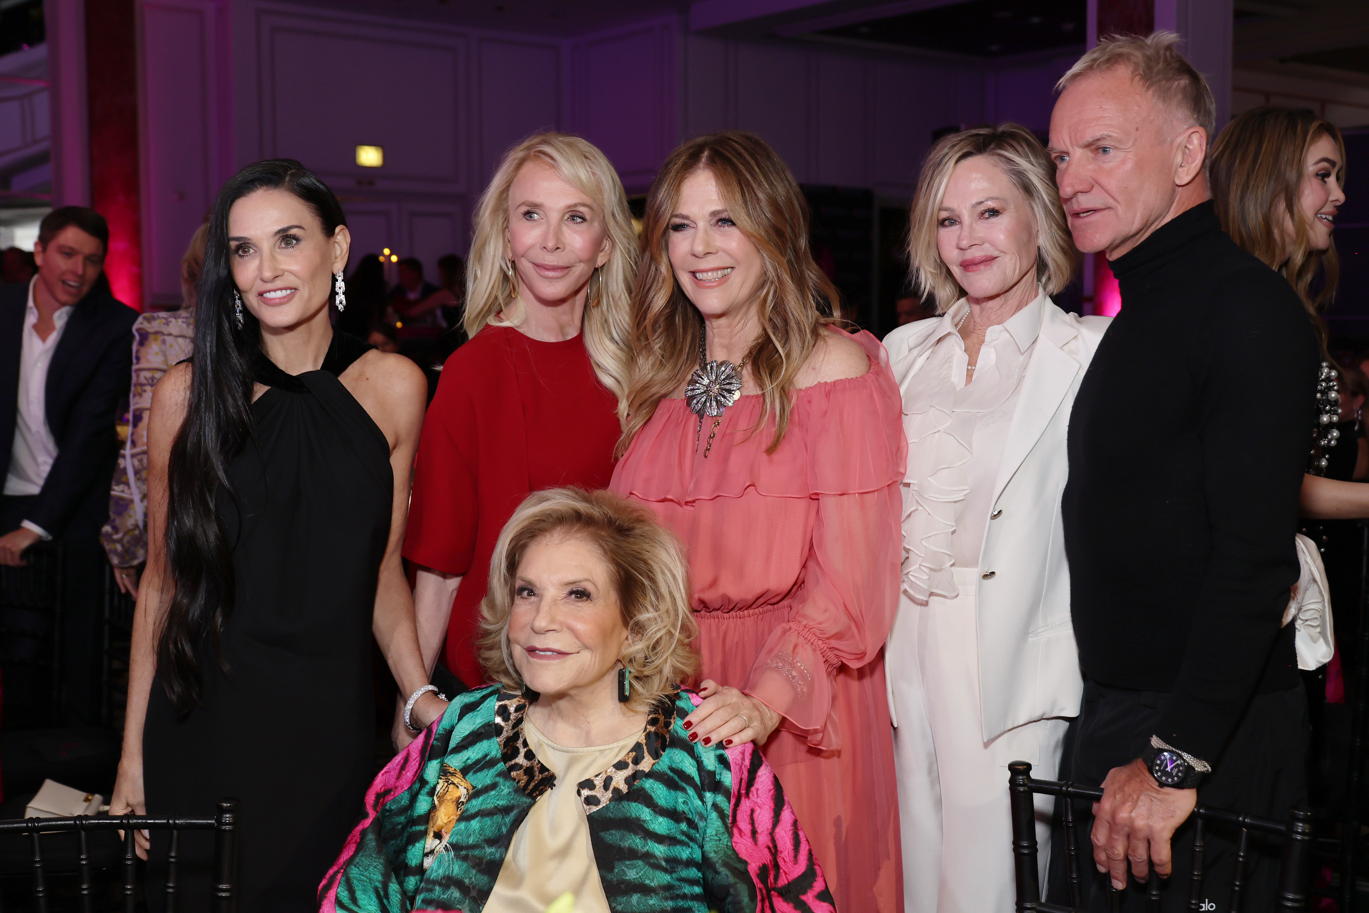 The WCRF Spends An Unforgettable Evening Celebrating Demi Moore & Wallis Annenberg